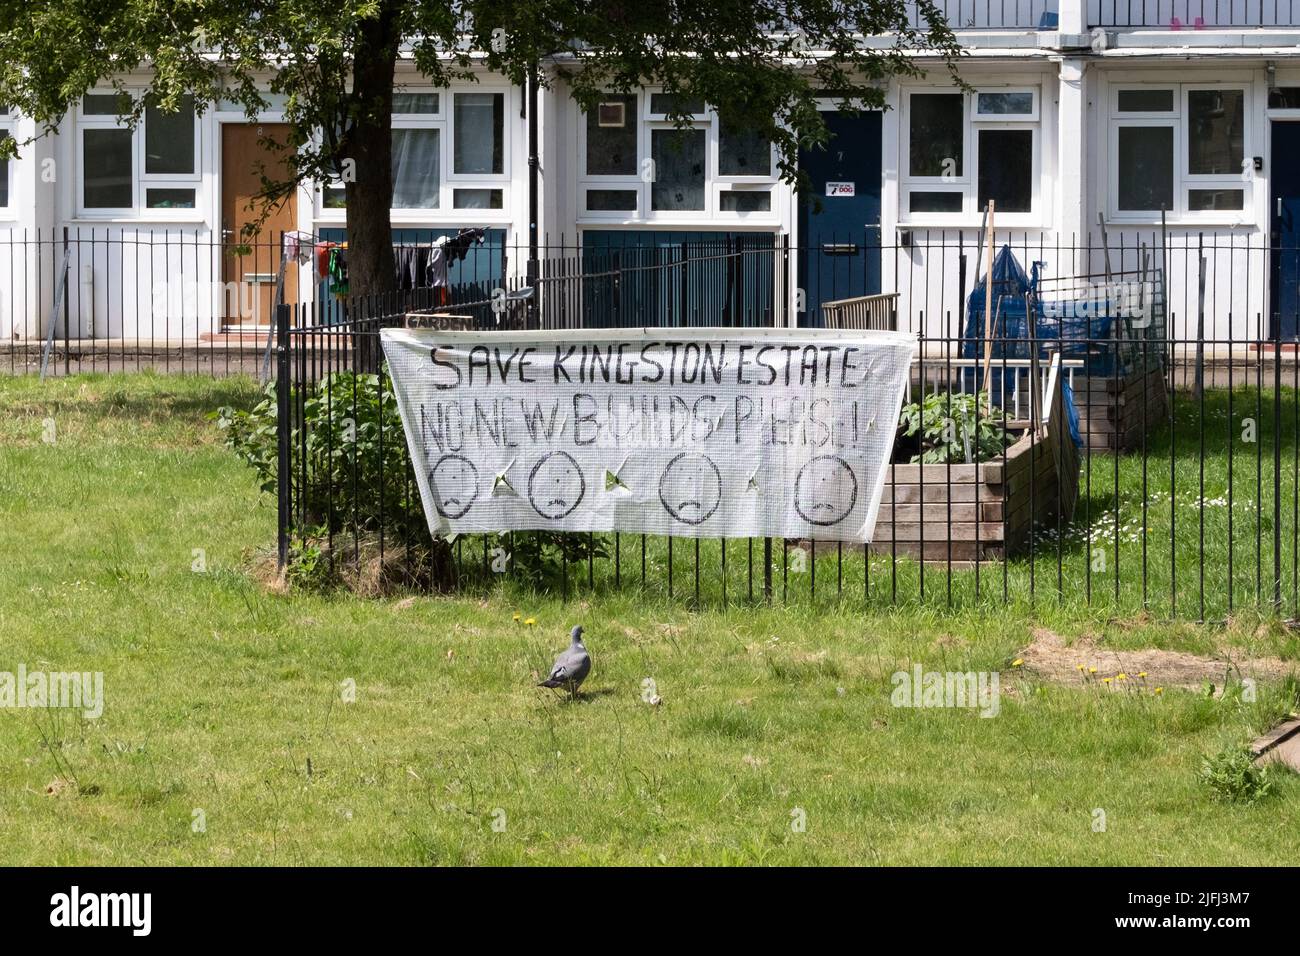 Banners protesting against housing redevelopment on a council estate in Southwark, South London, UK, England 2022. Stock Photo